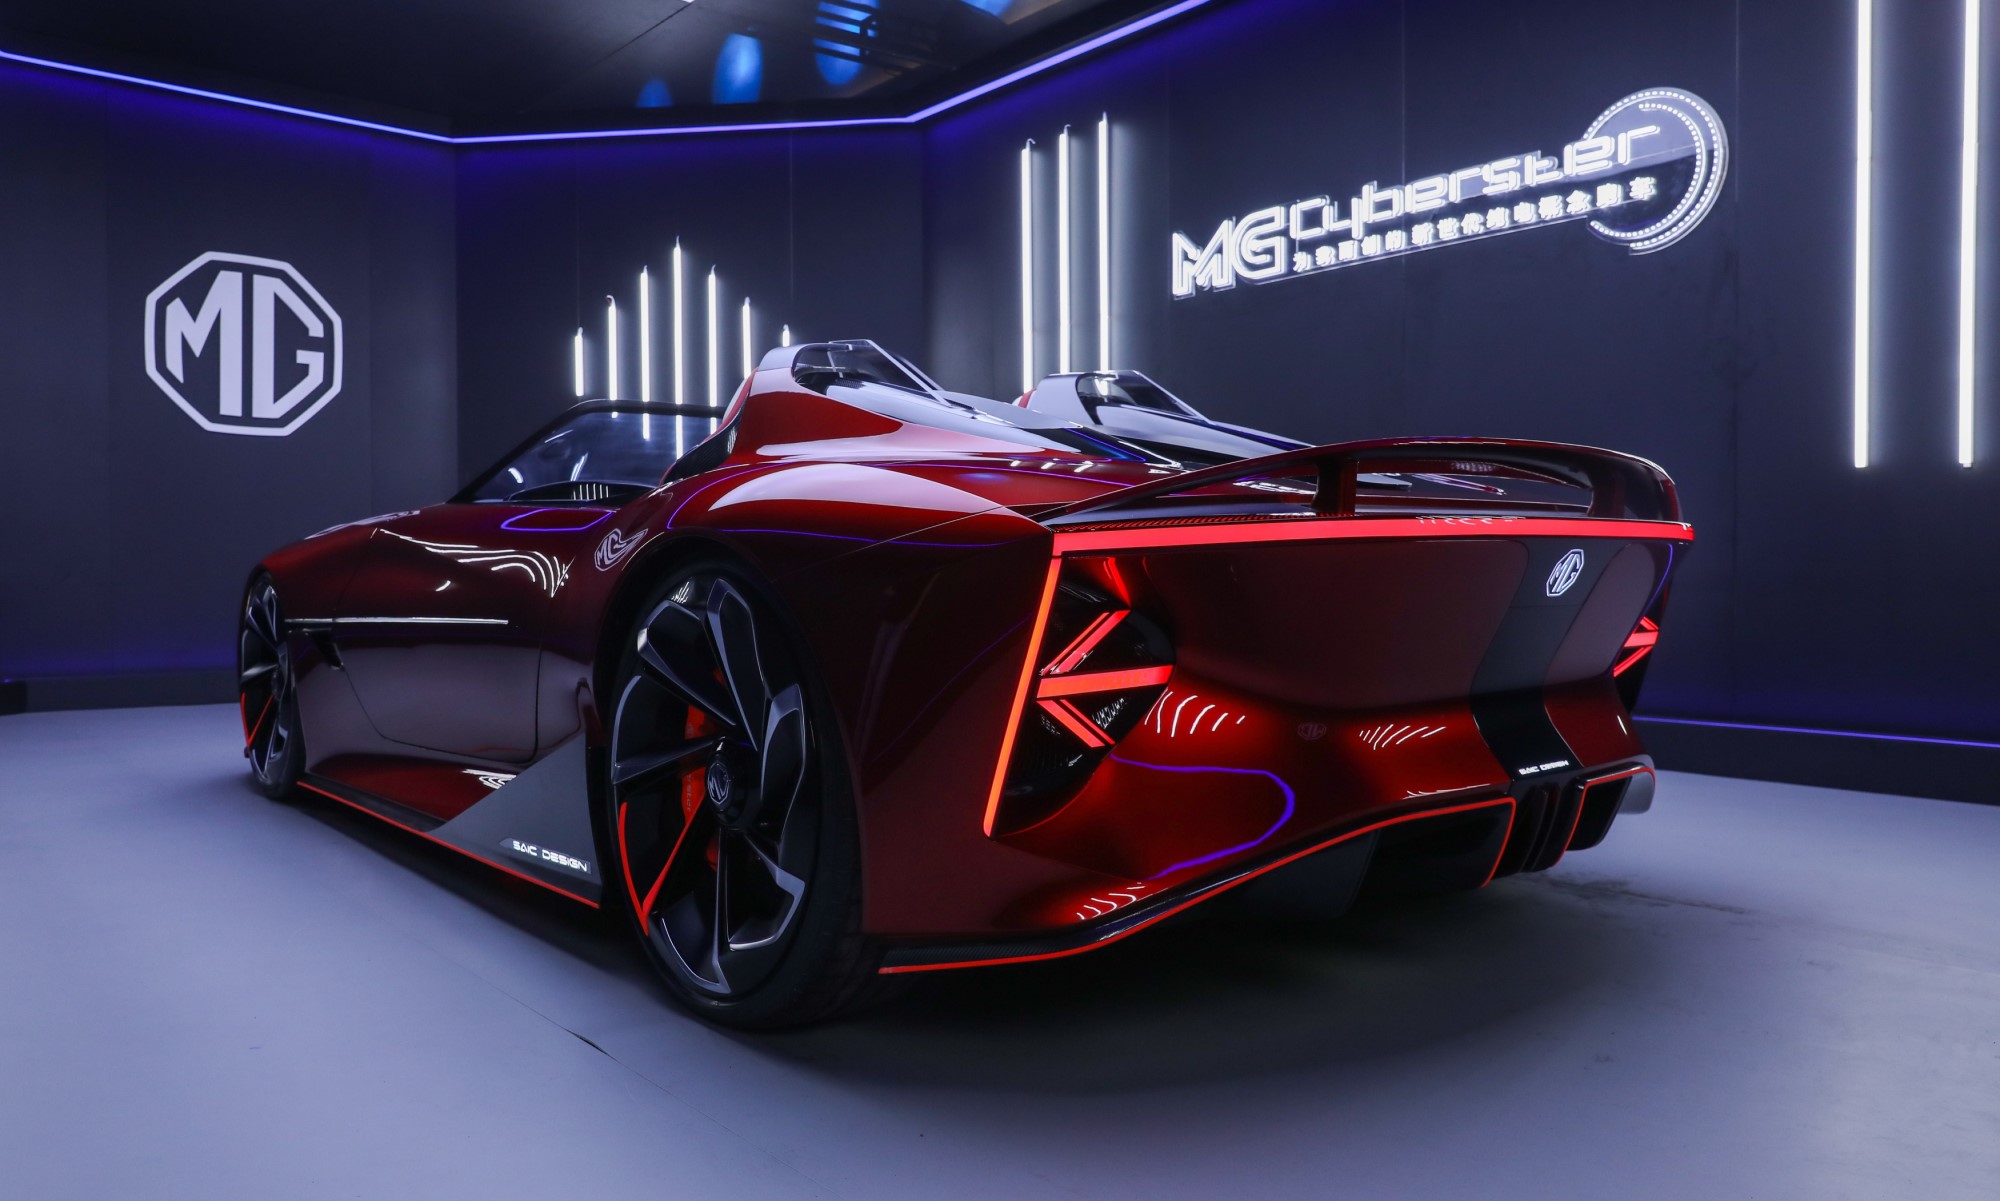 MG Cyberster Concept rear